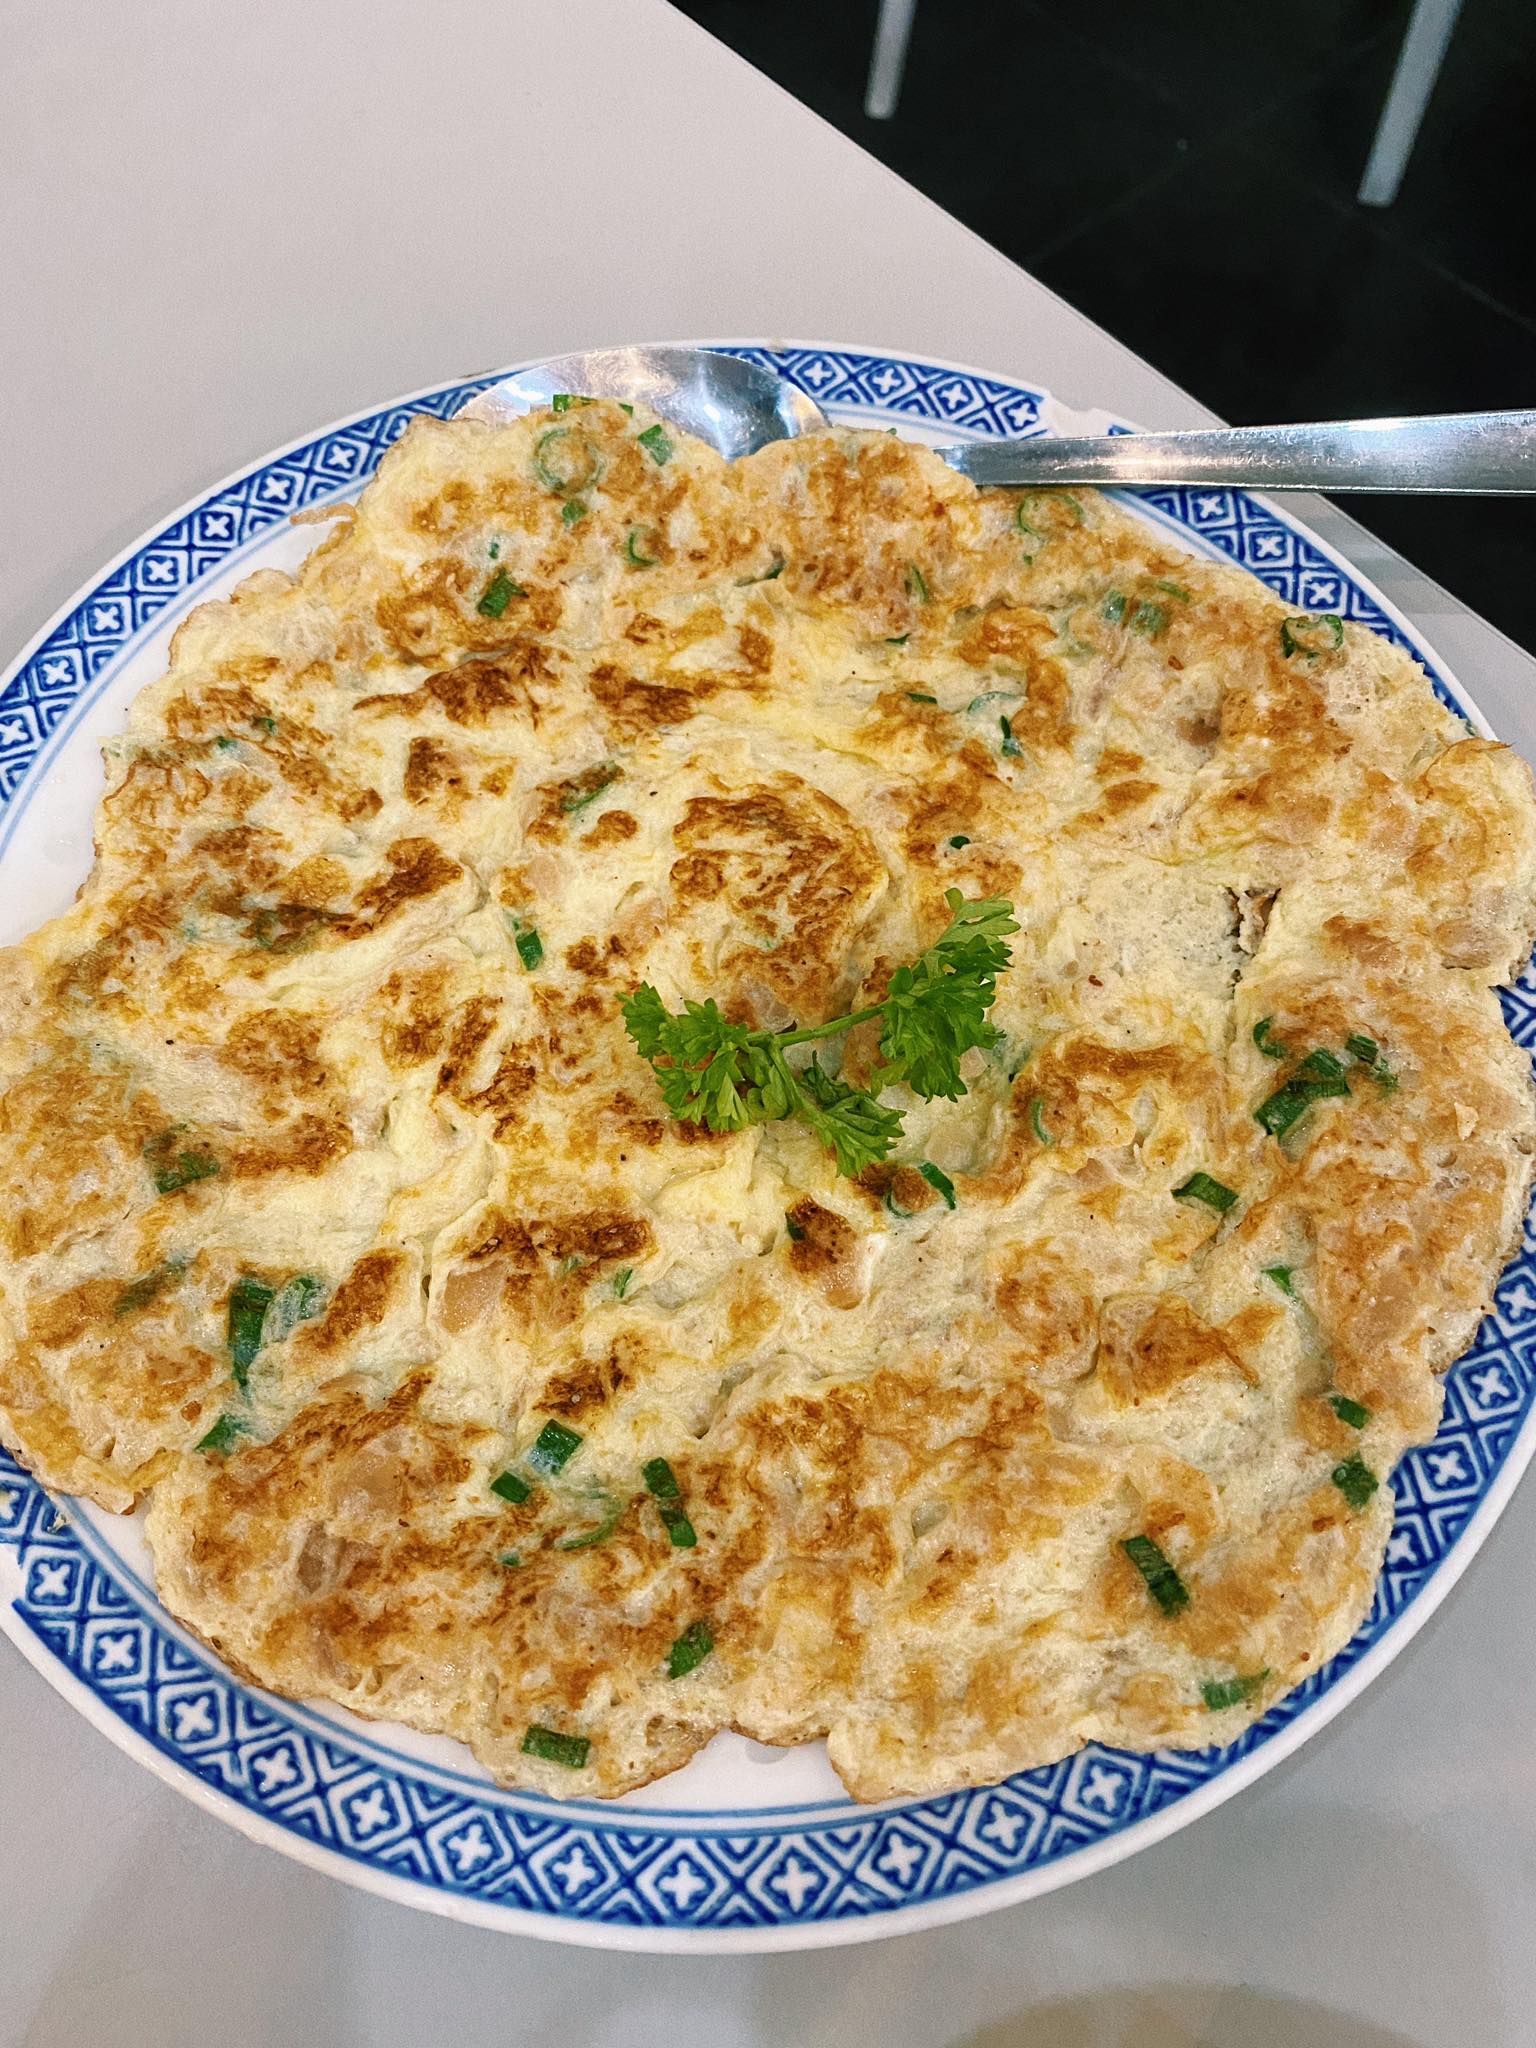 Fried egg with salted turnip teochew laoer